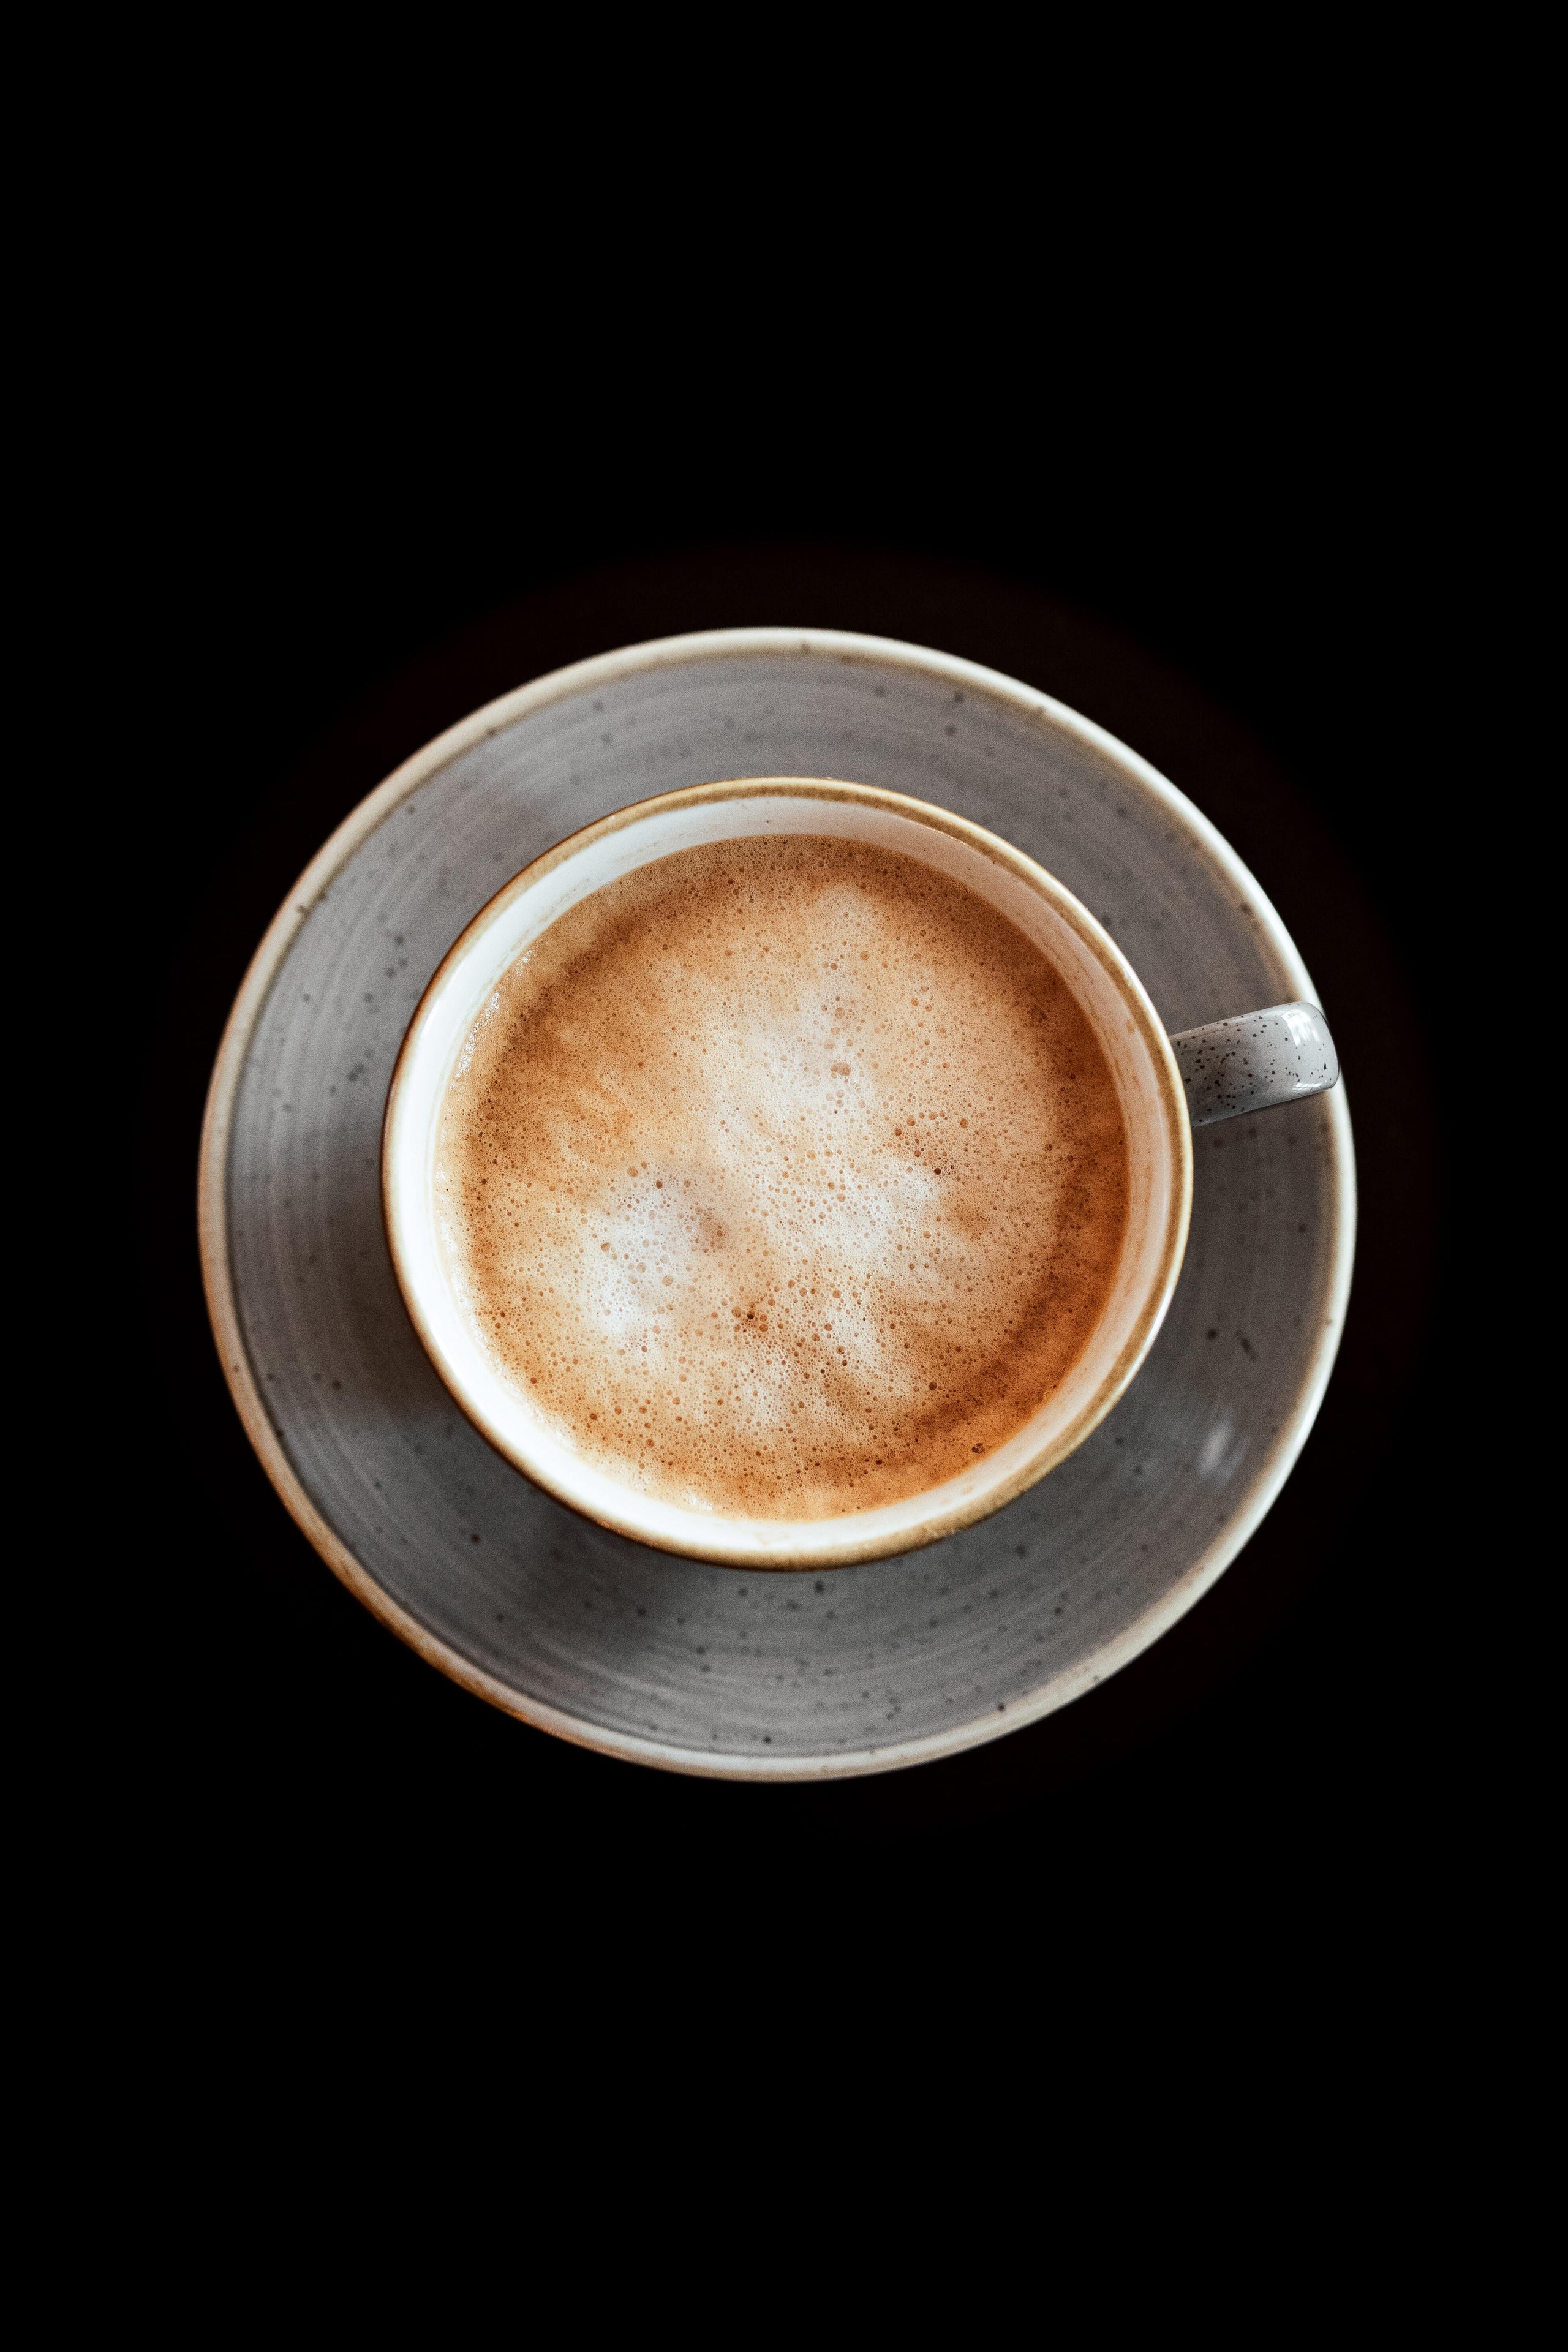 16+ Thousand Capuccino Royalty-Free Images, Stock Photos